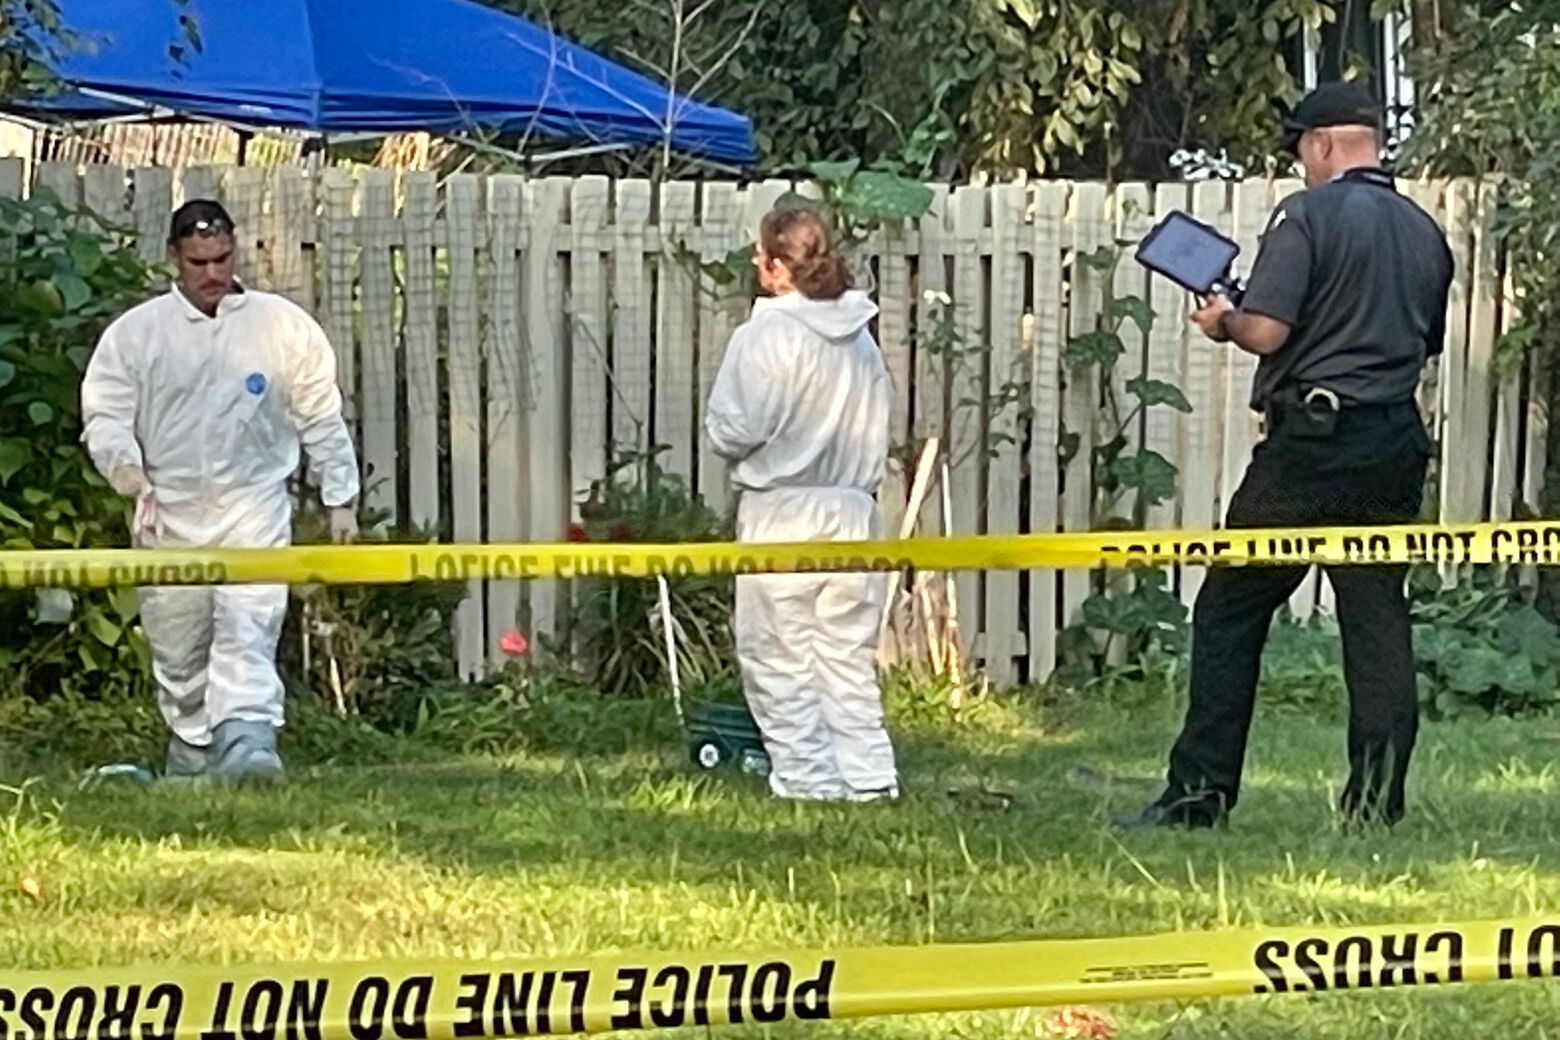 Missing Falls Church dad, 78, found buried in backyard; son, 19, faces  murder charge | WTOP